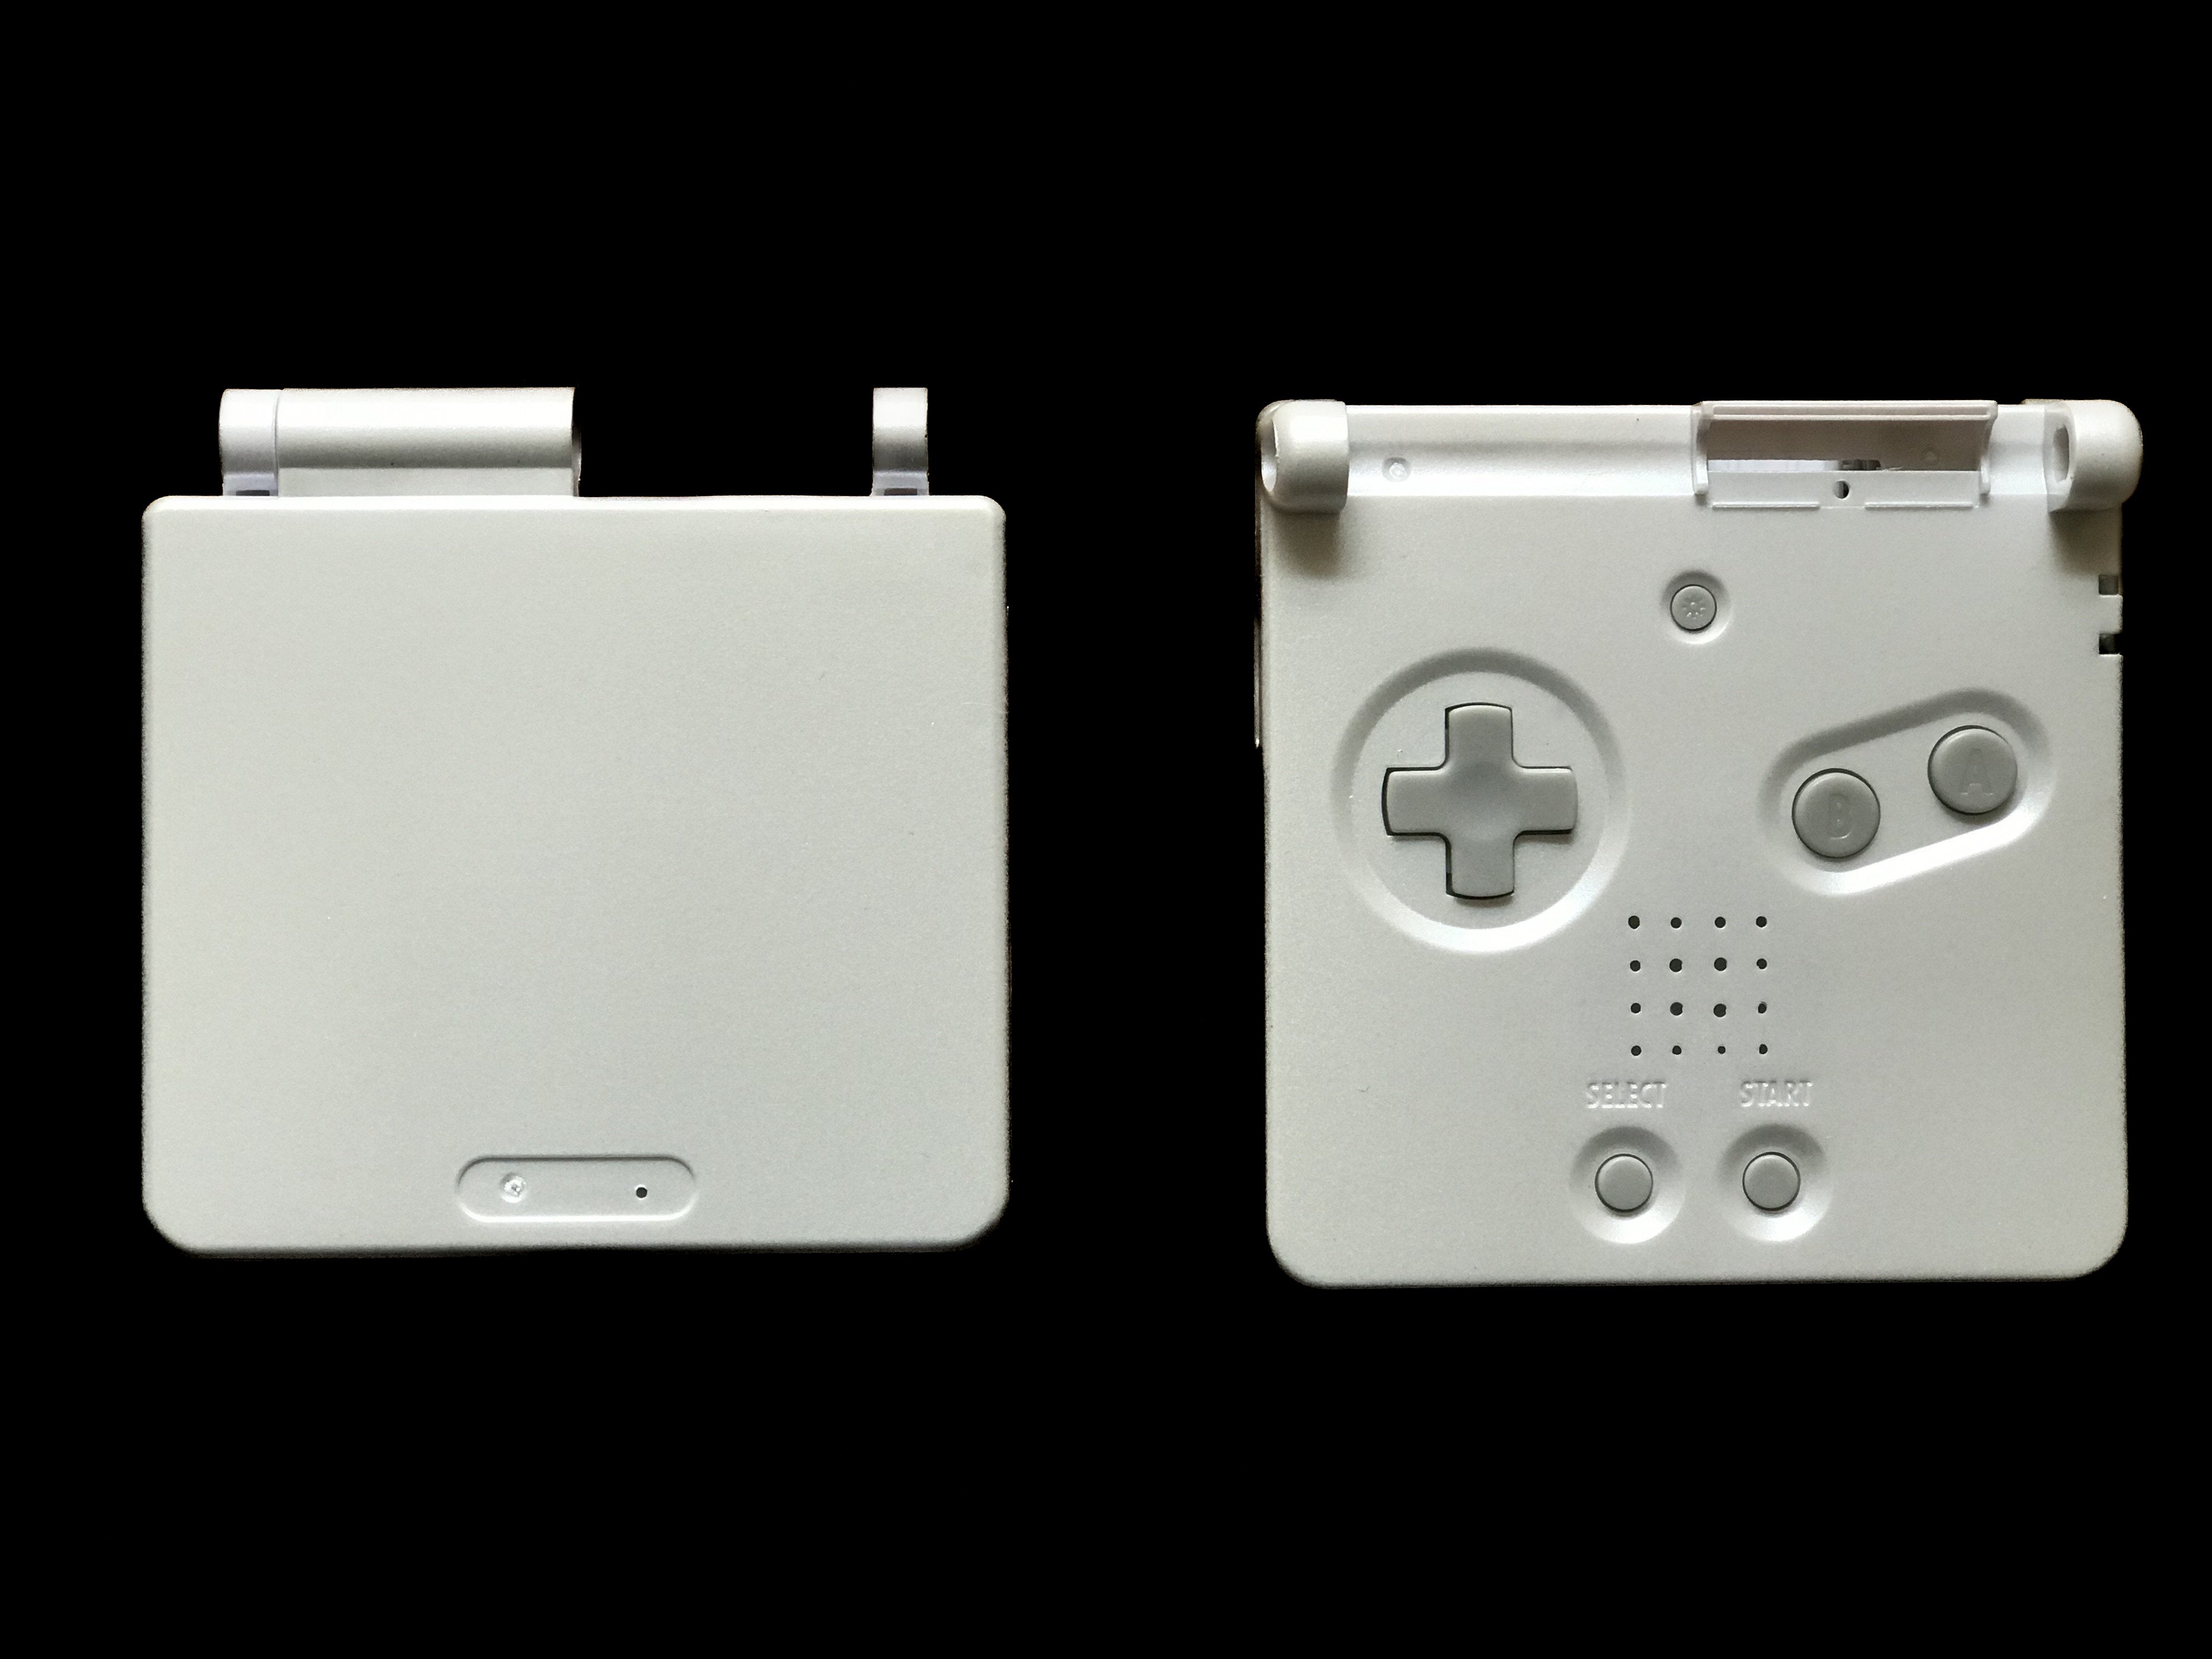 Game Boy Advance SP AGS-101 Console